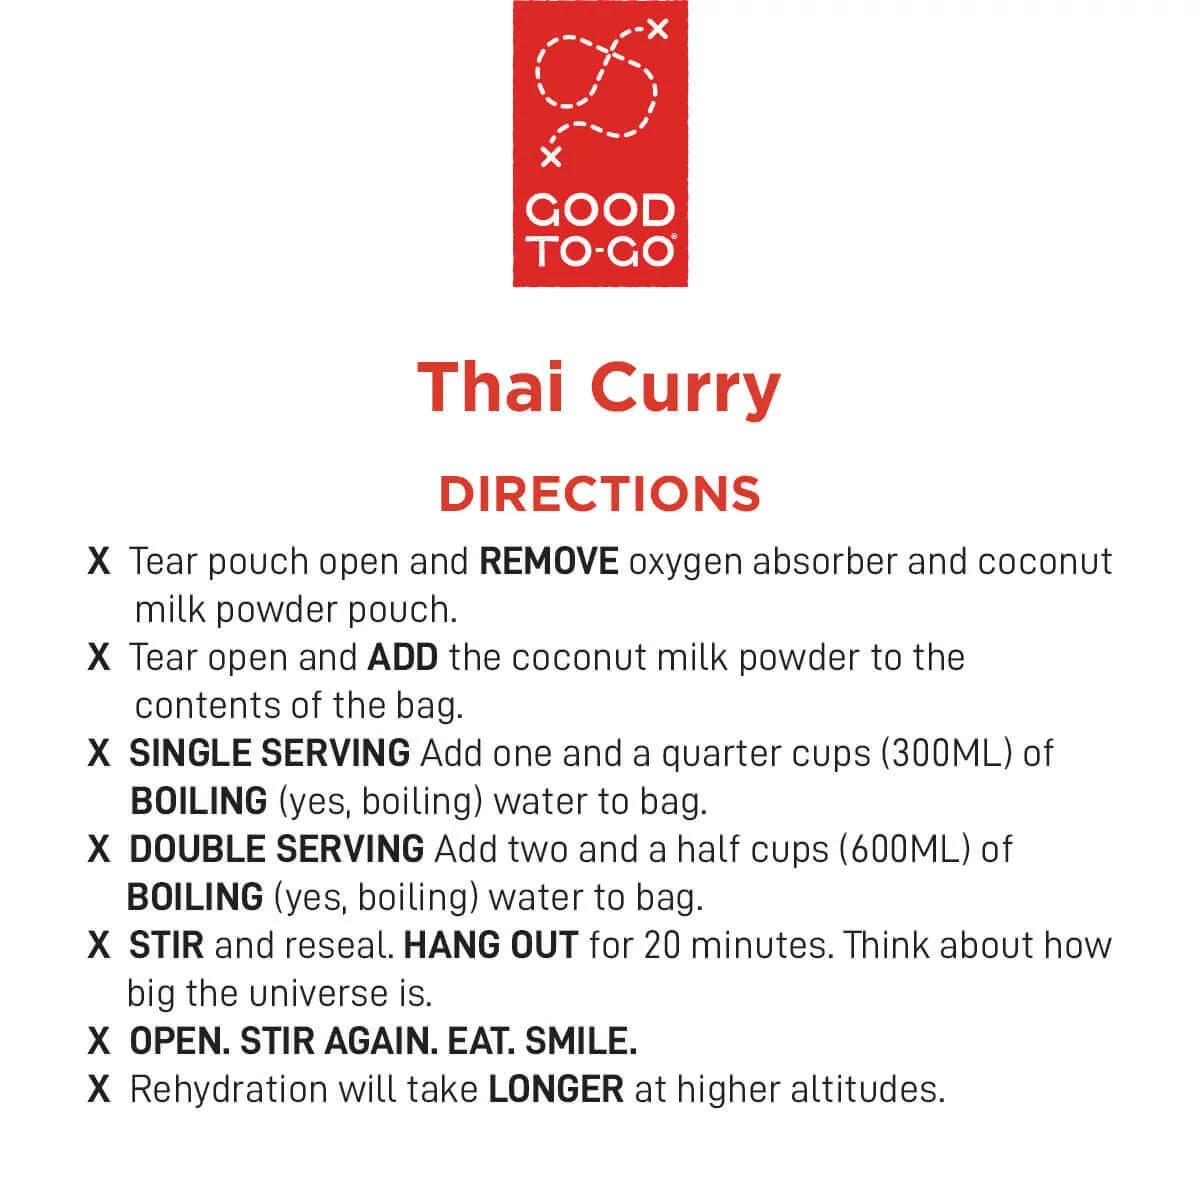 Good To-Go Thai Curry Directions